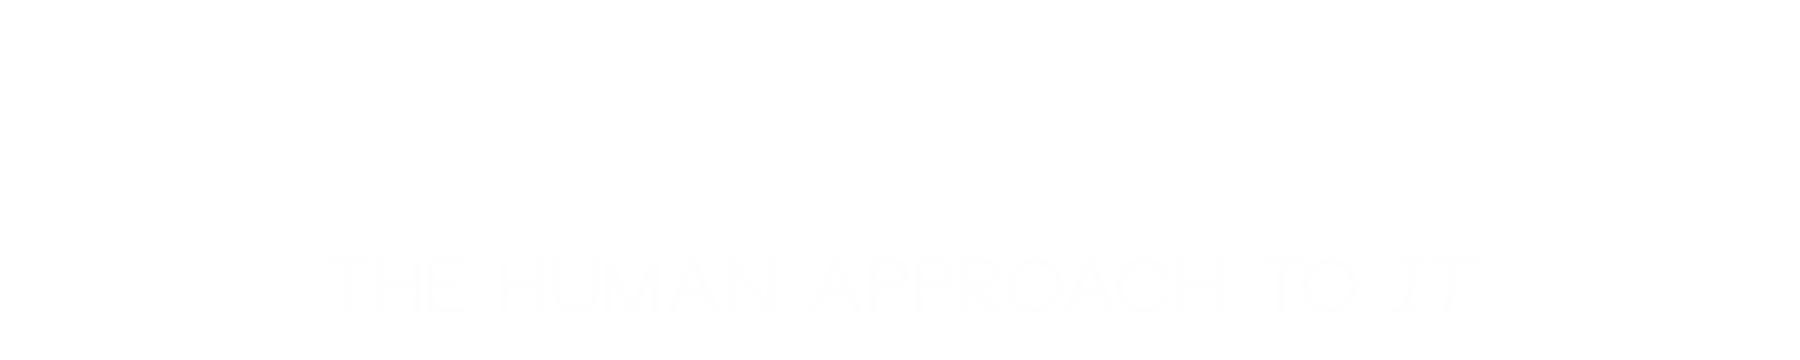 Haloed Solutions | The Human Approach to IT